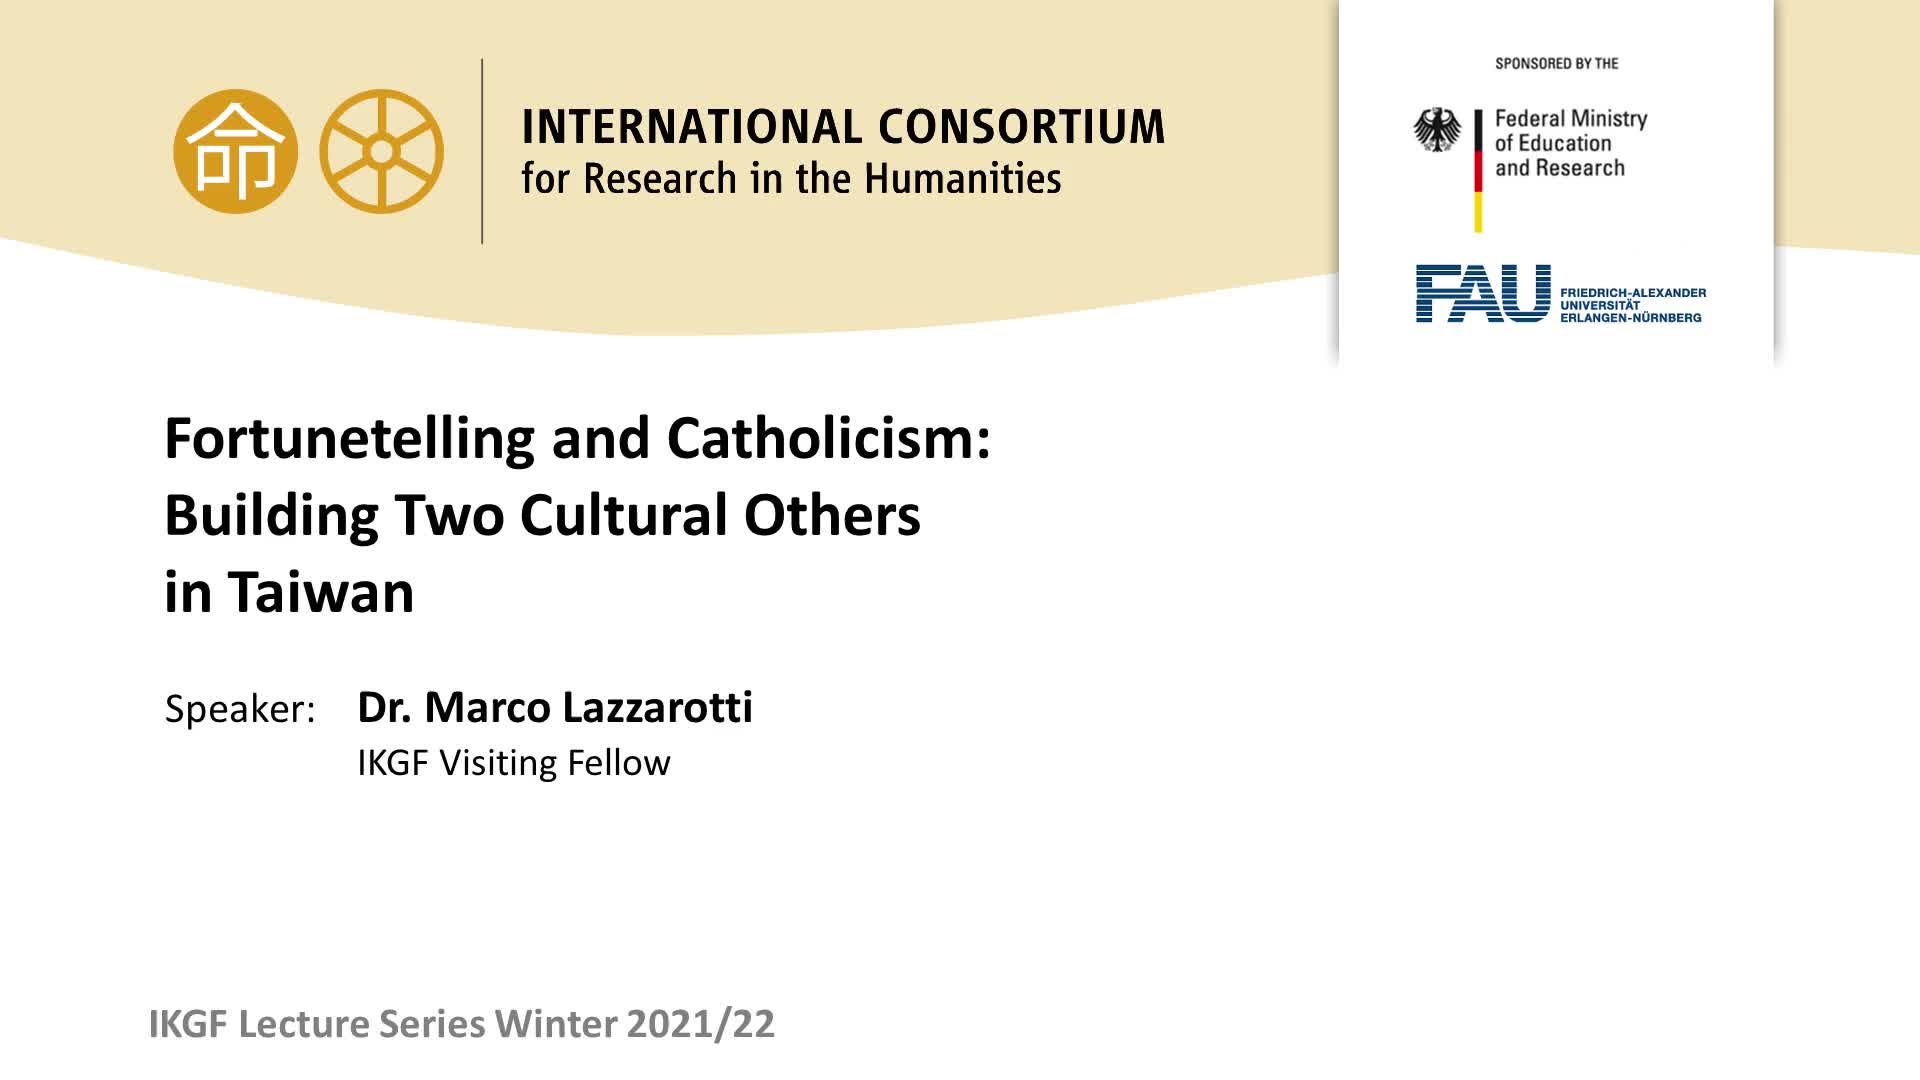 Fortuneteller and Catholicism in Taiwan: Building the Cosmological Other preview image